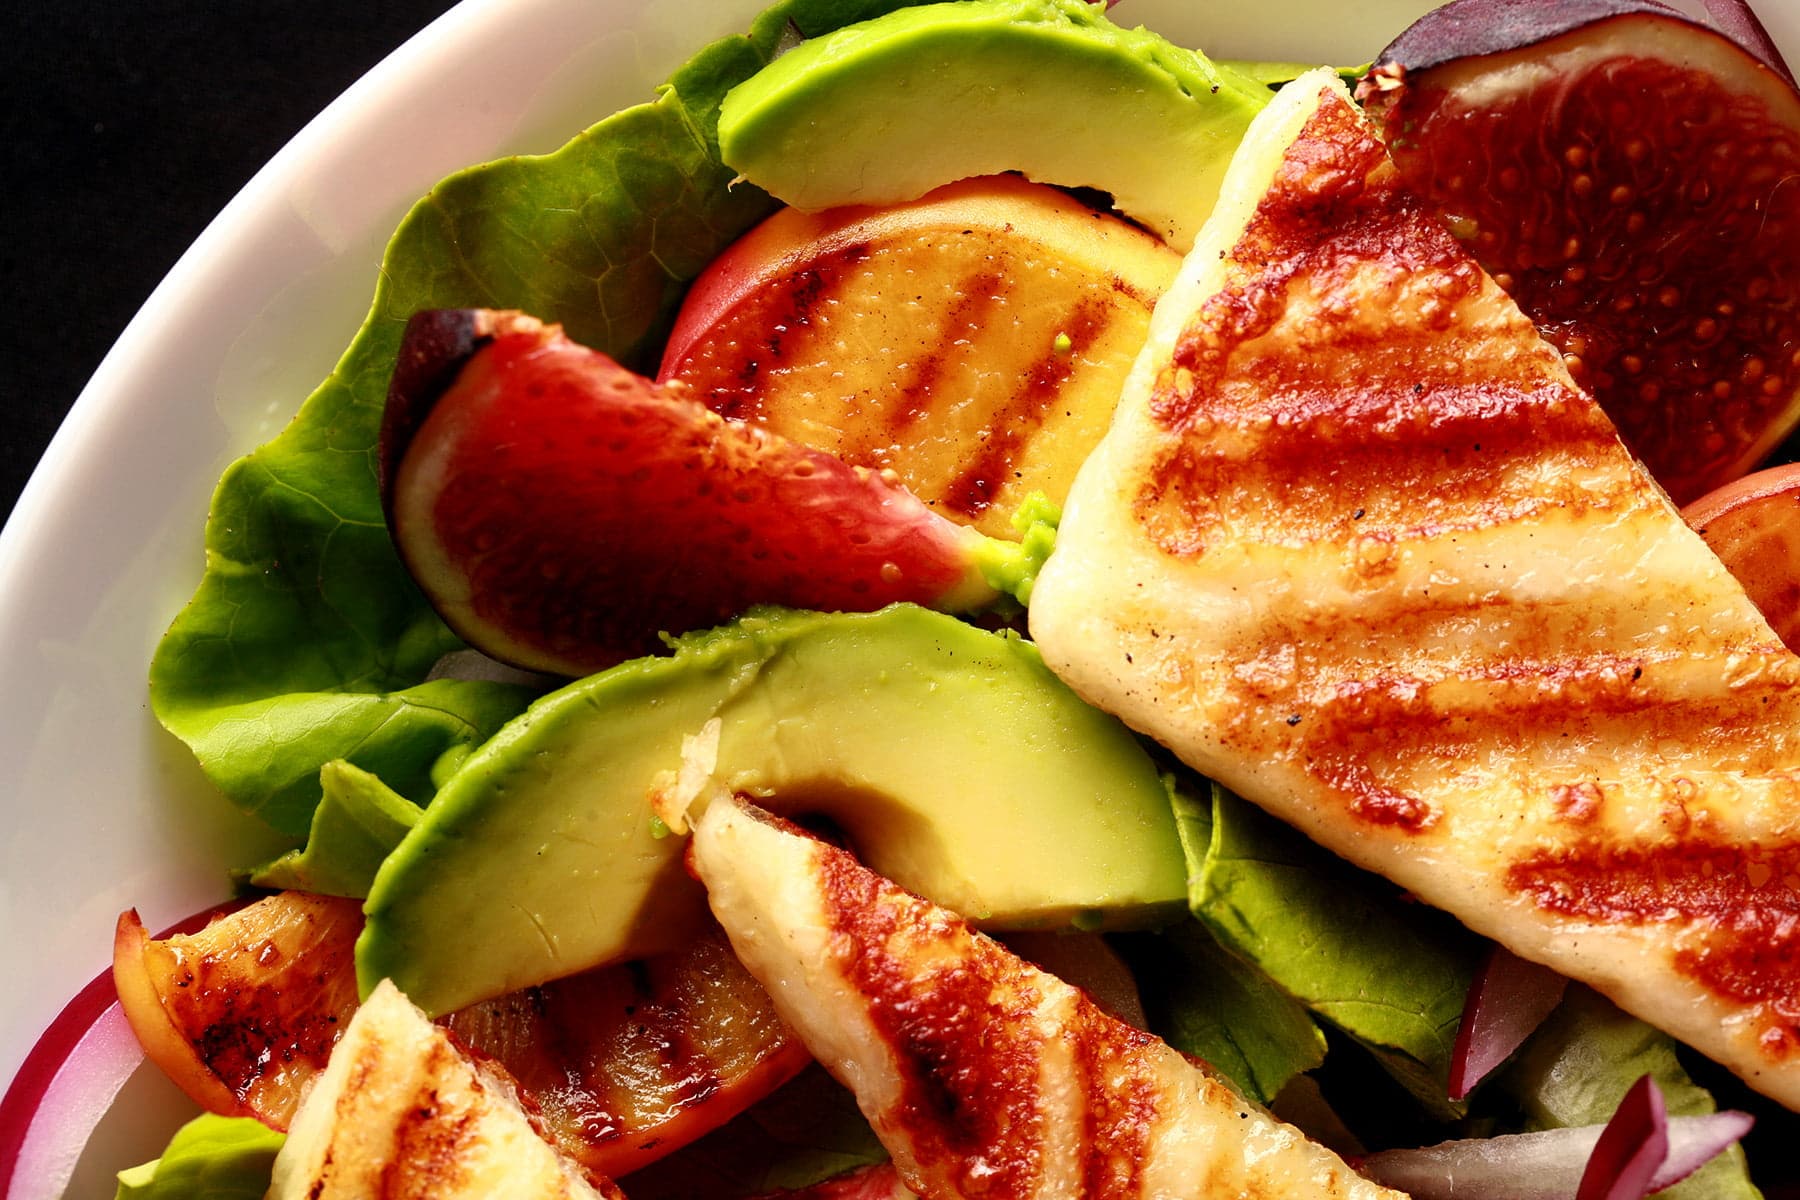 A bowl of salad, with sliced figs, grilled peaches, and strips of grilled white cheese. Grilled Halloumi Salad with Peaches and Figs